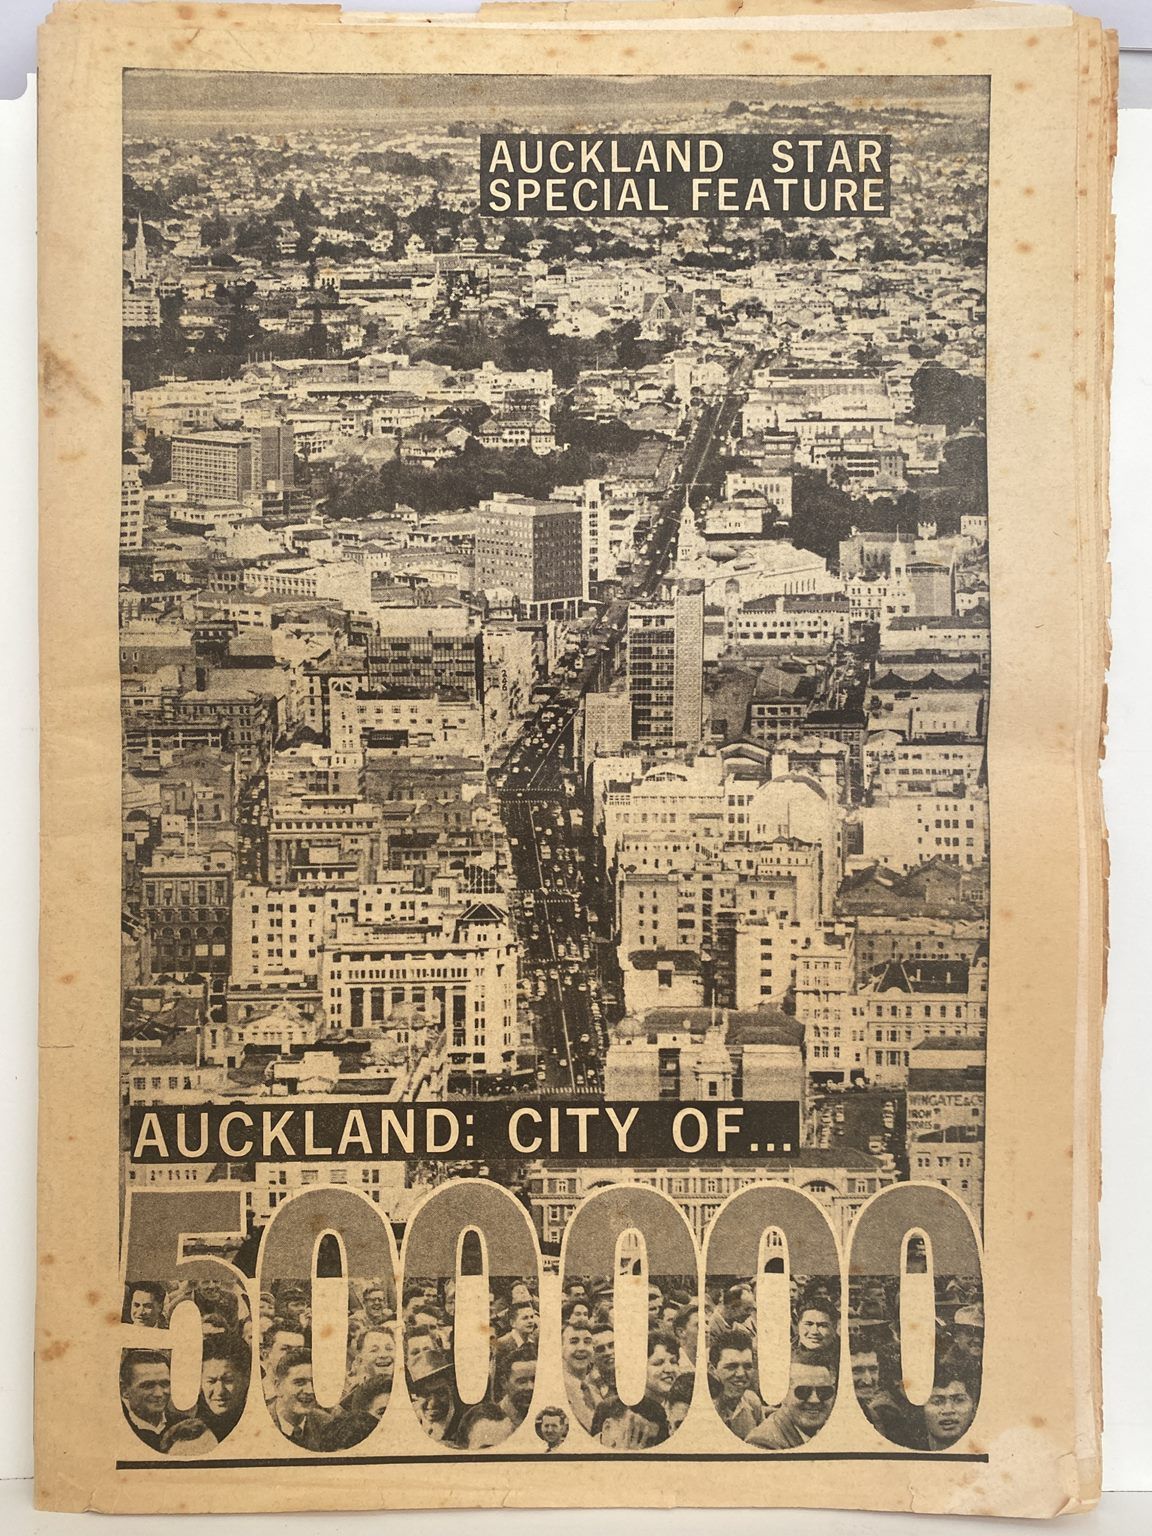 OLD NEWSPAPER: Auckland Star - City of 500,000 Special Feature, 30 May 1964